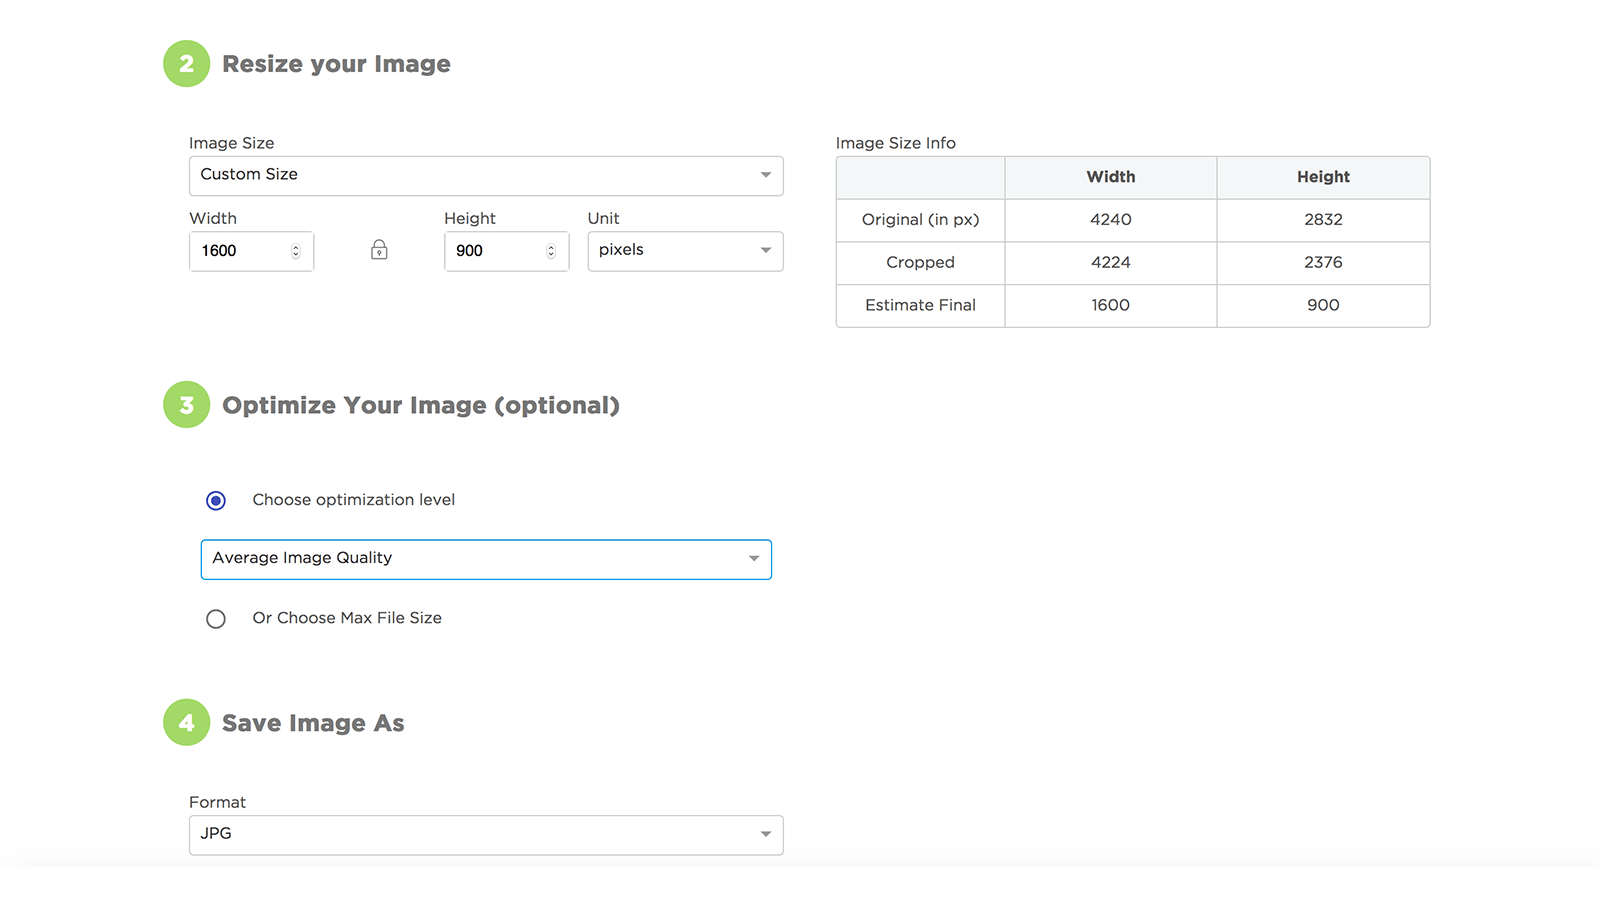 Screenshot - resize optimize and export in Image Resize